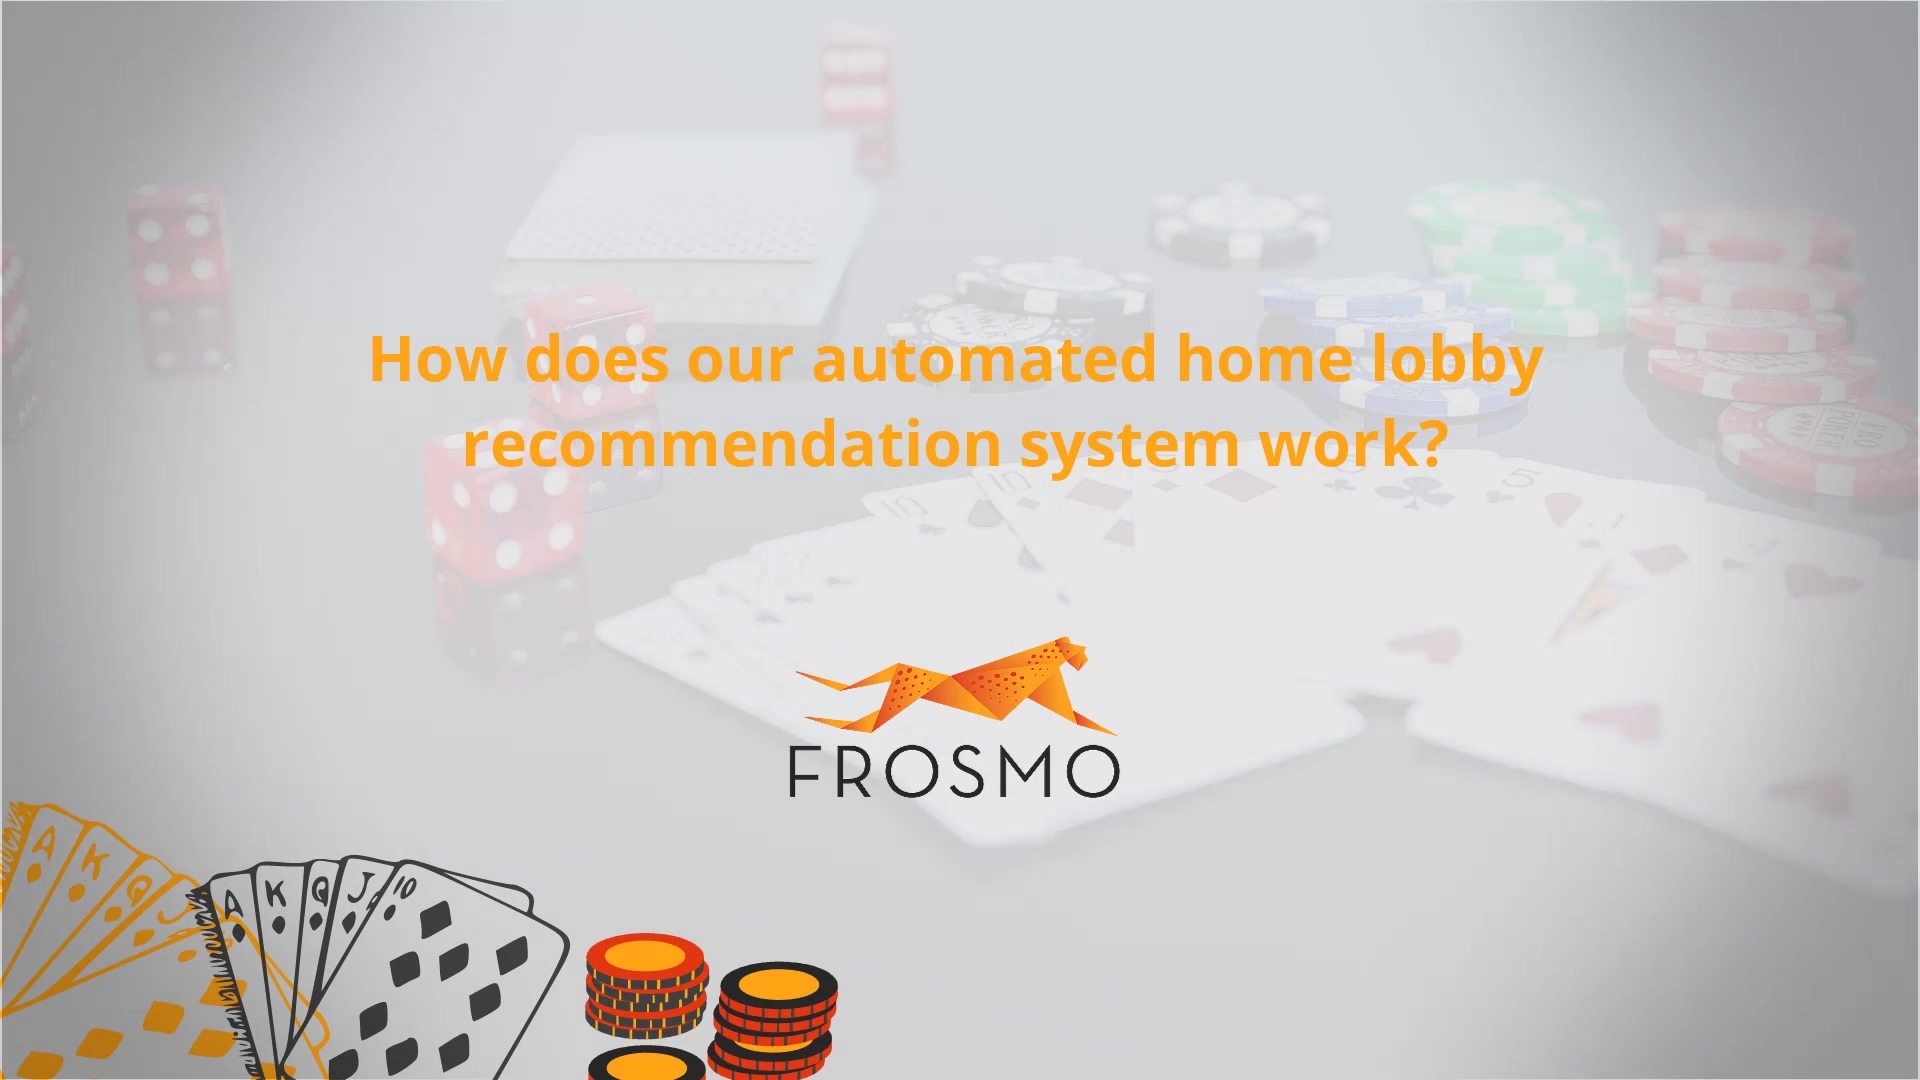 Fola iGaming video - first slide